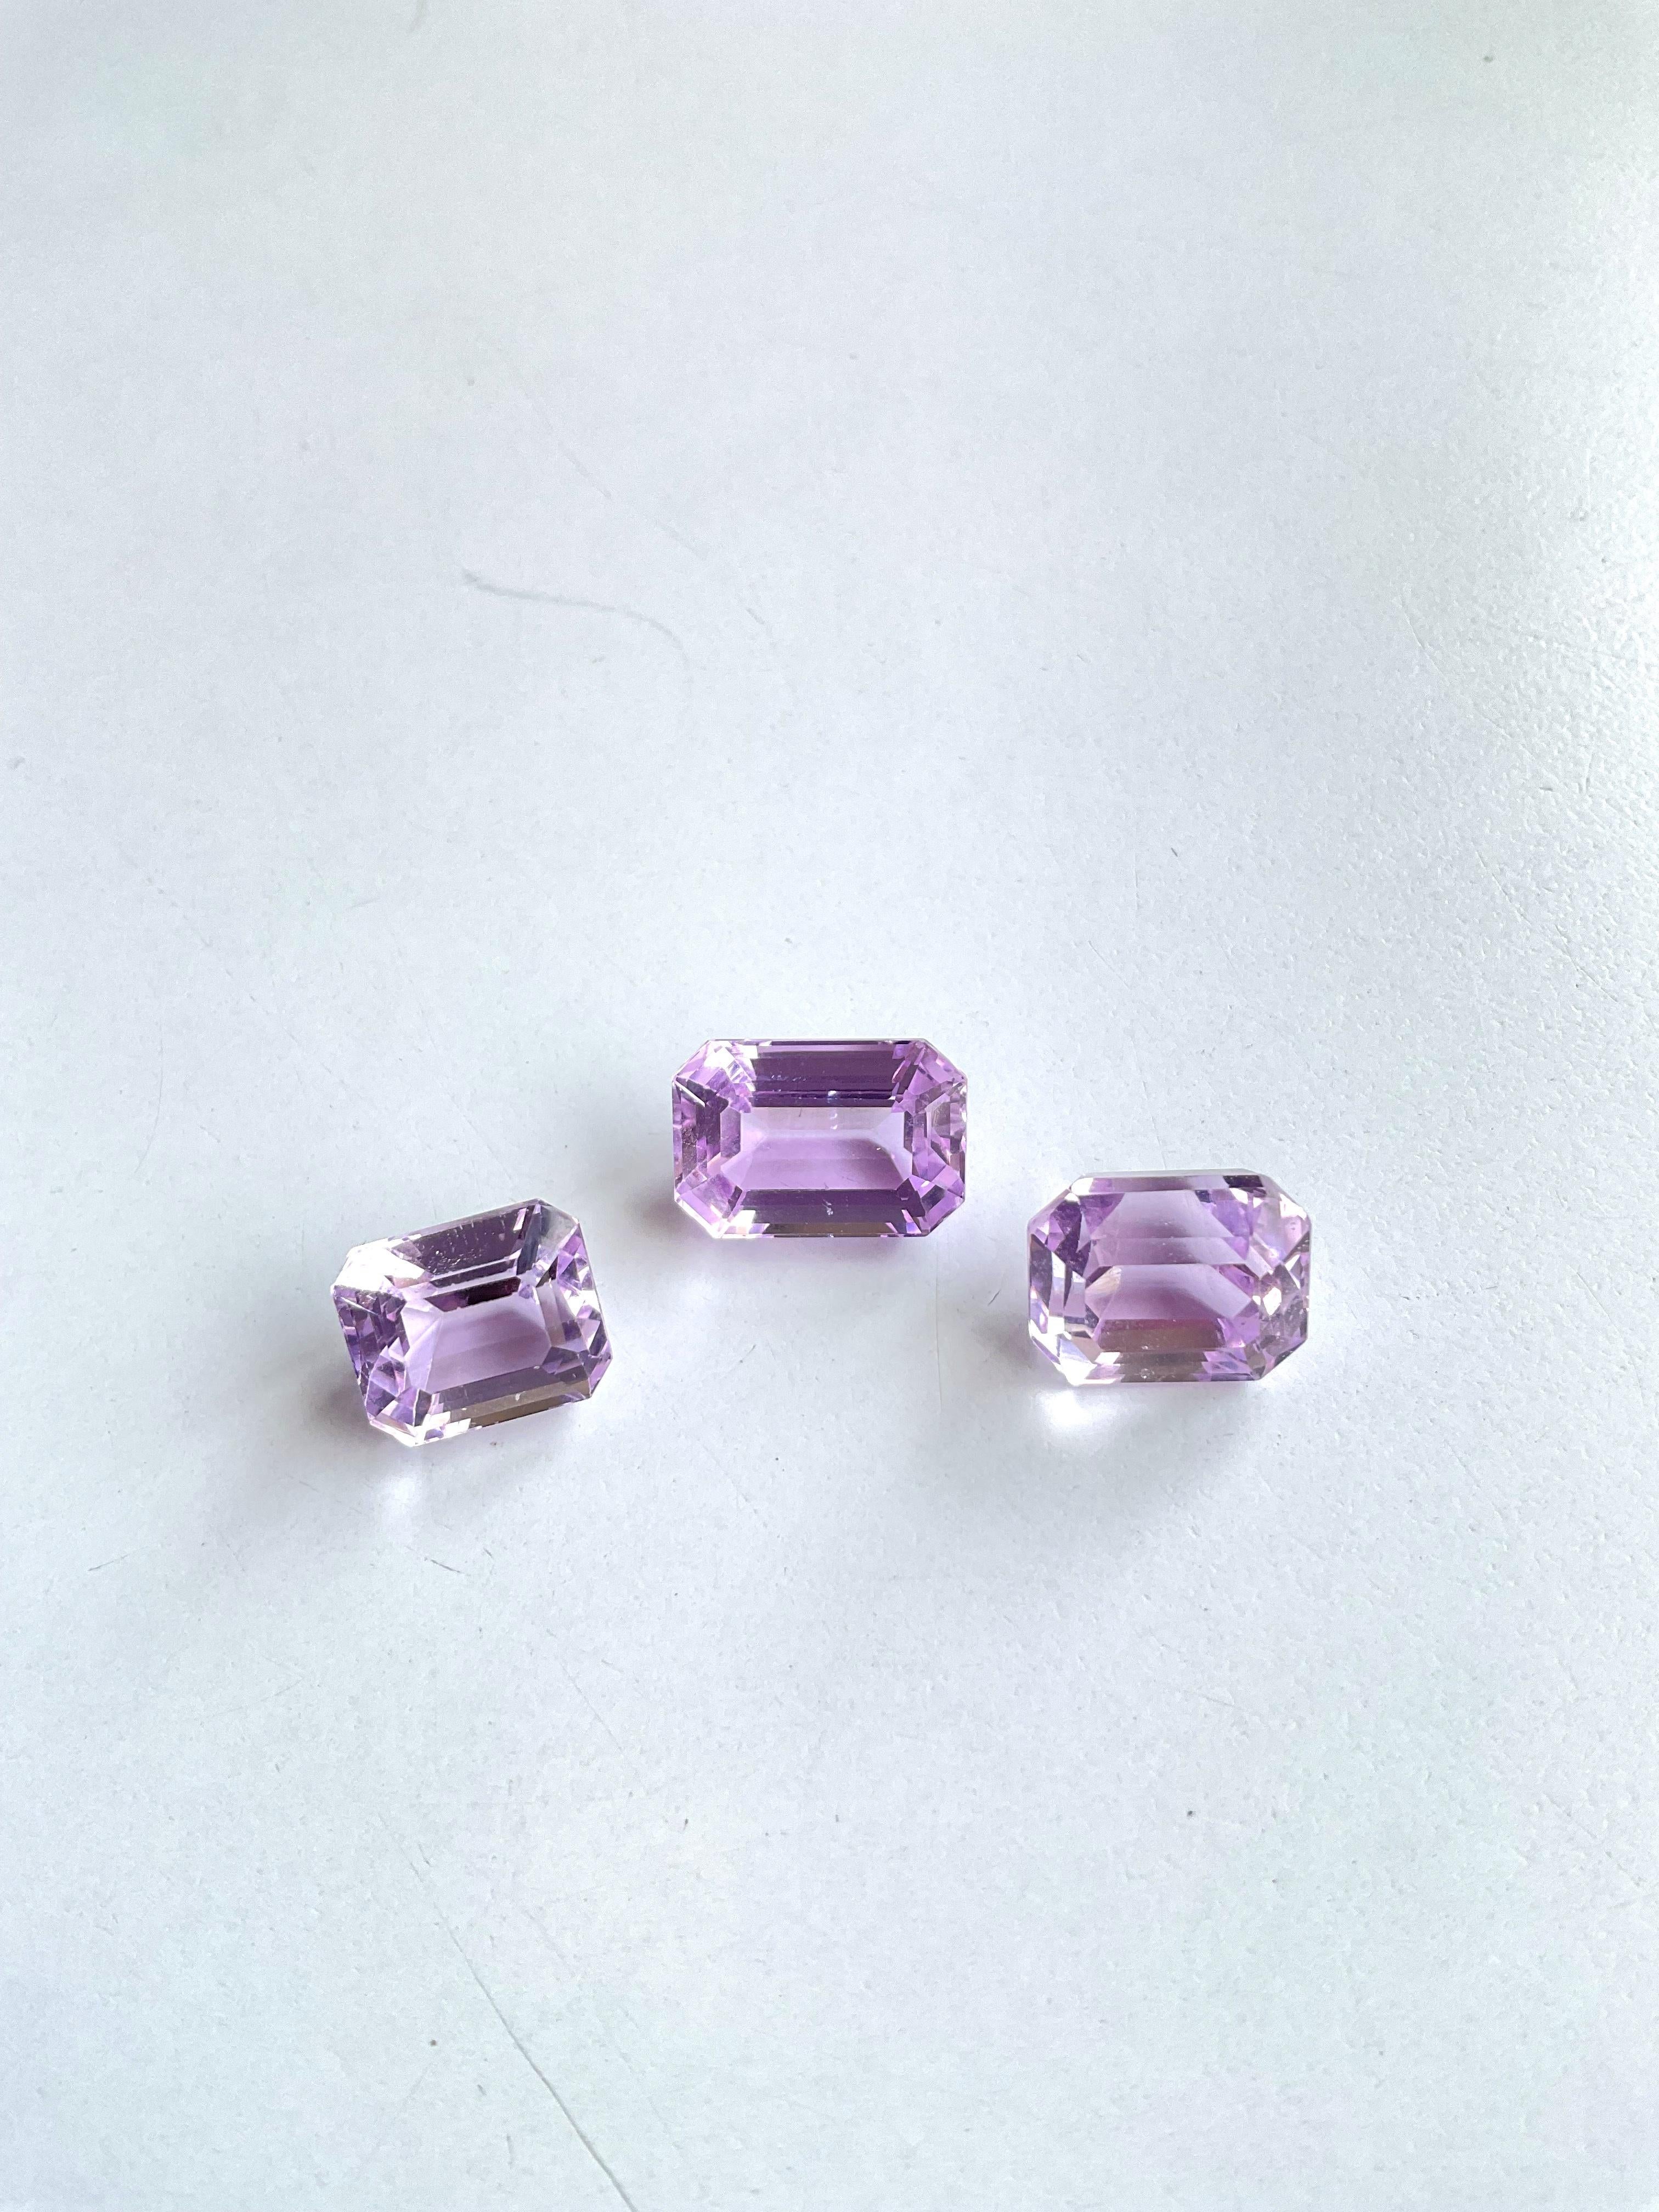 22.56 Carats Pink Kunzite Octagon Natural Cut Stones For Fine Gem Jewellery For Sale 2